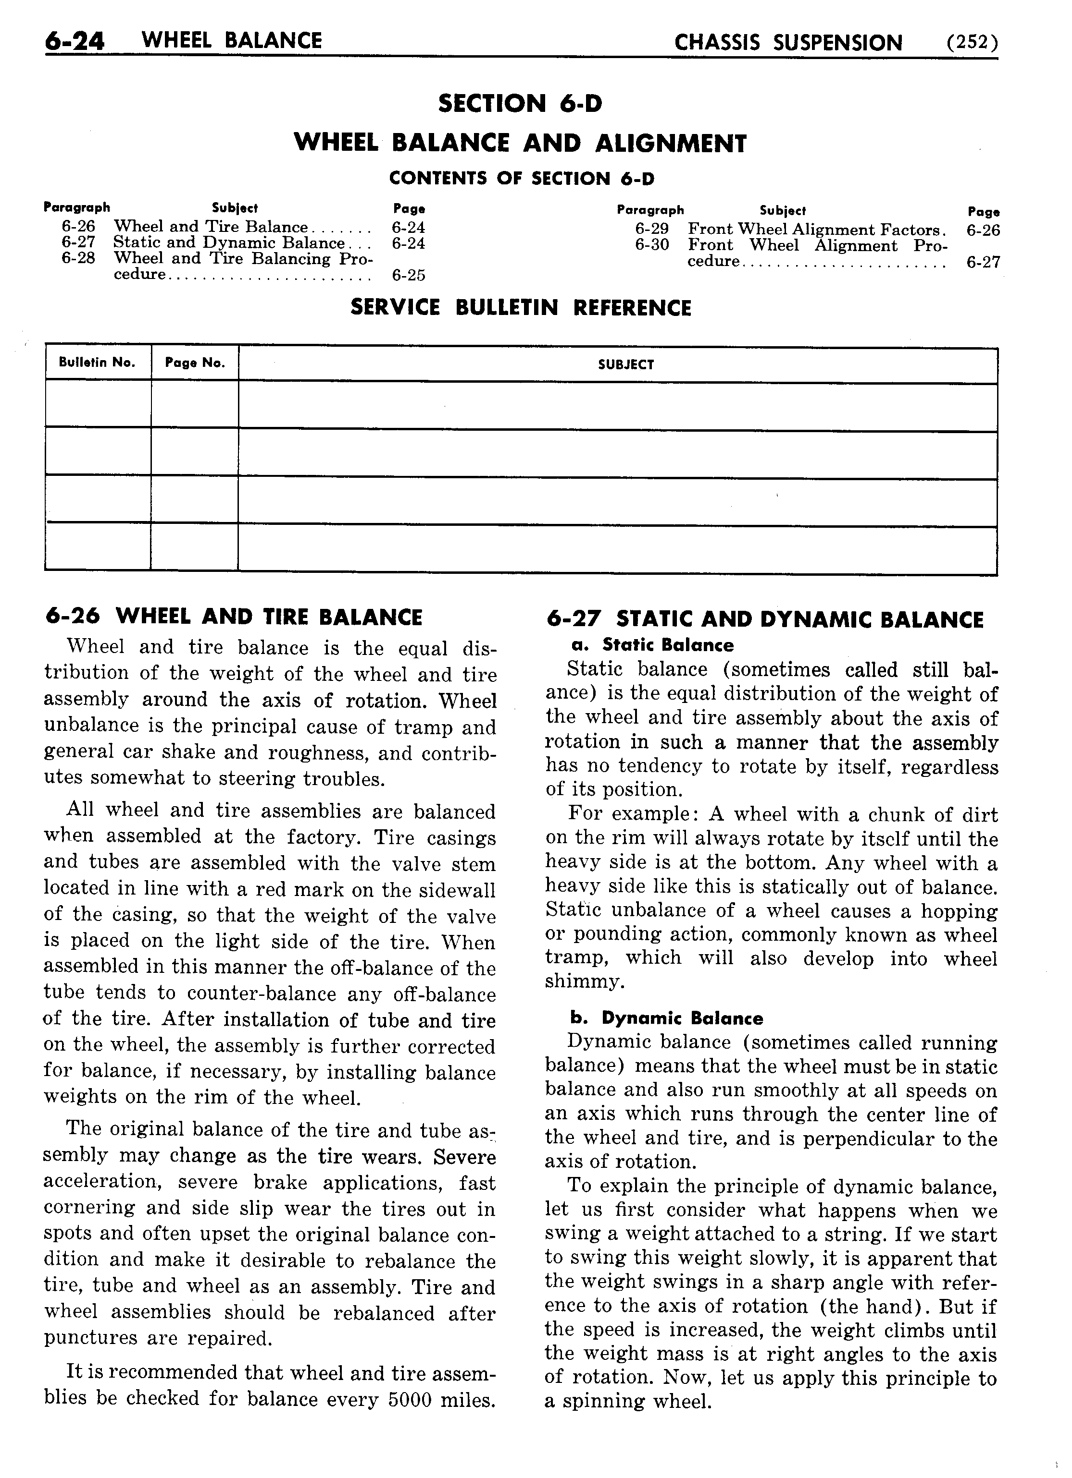 n_07 1951 Buick Shop Manual - Chassis Suspension-024-024.jpg